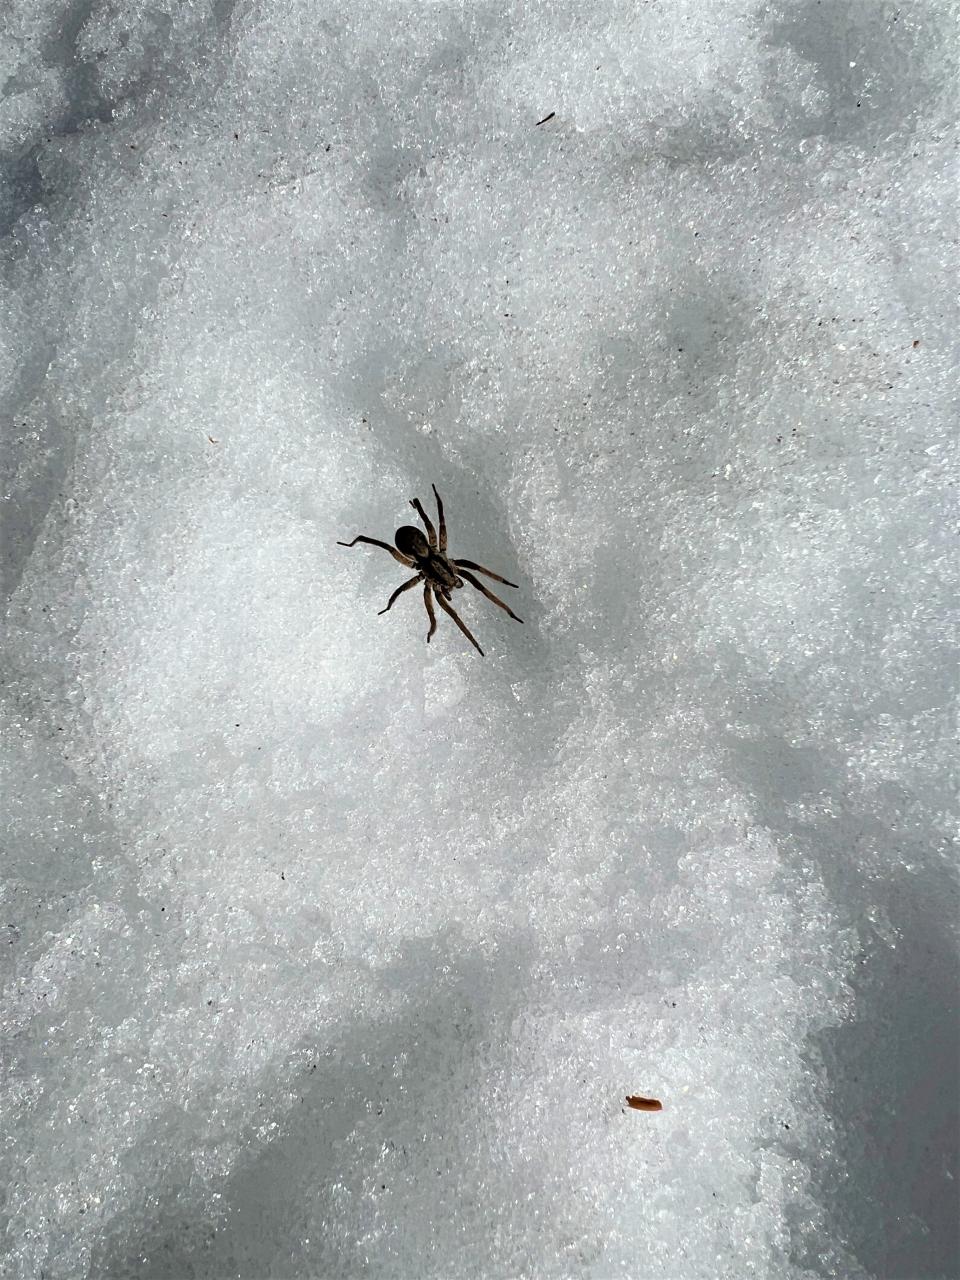 A wolfe spider emerging on a warm day to hunt at the Great Works Regional Land Trust Rocky Hills Preserve in South Berwick.